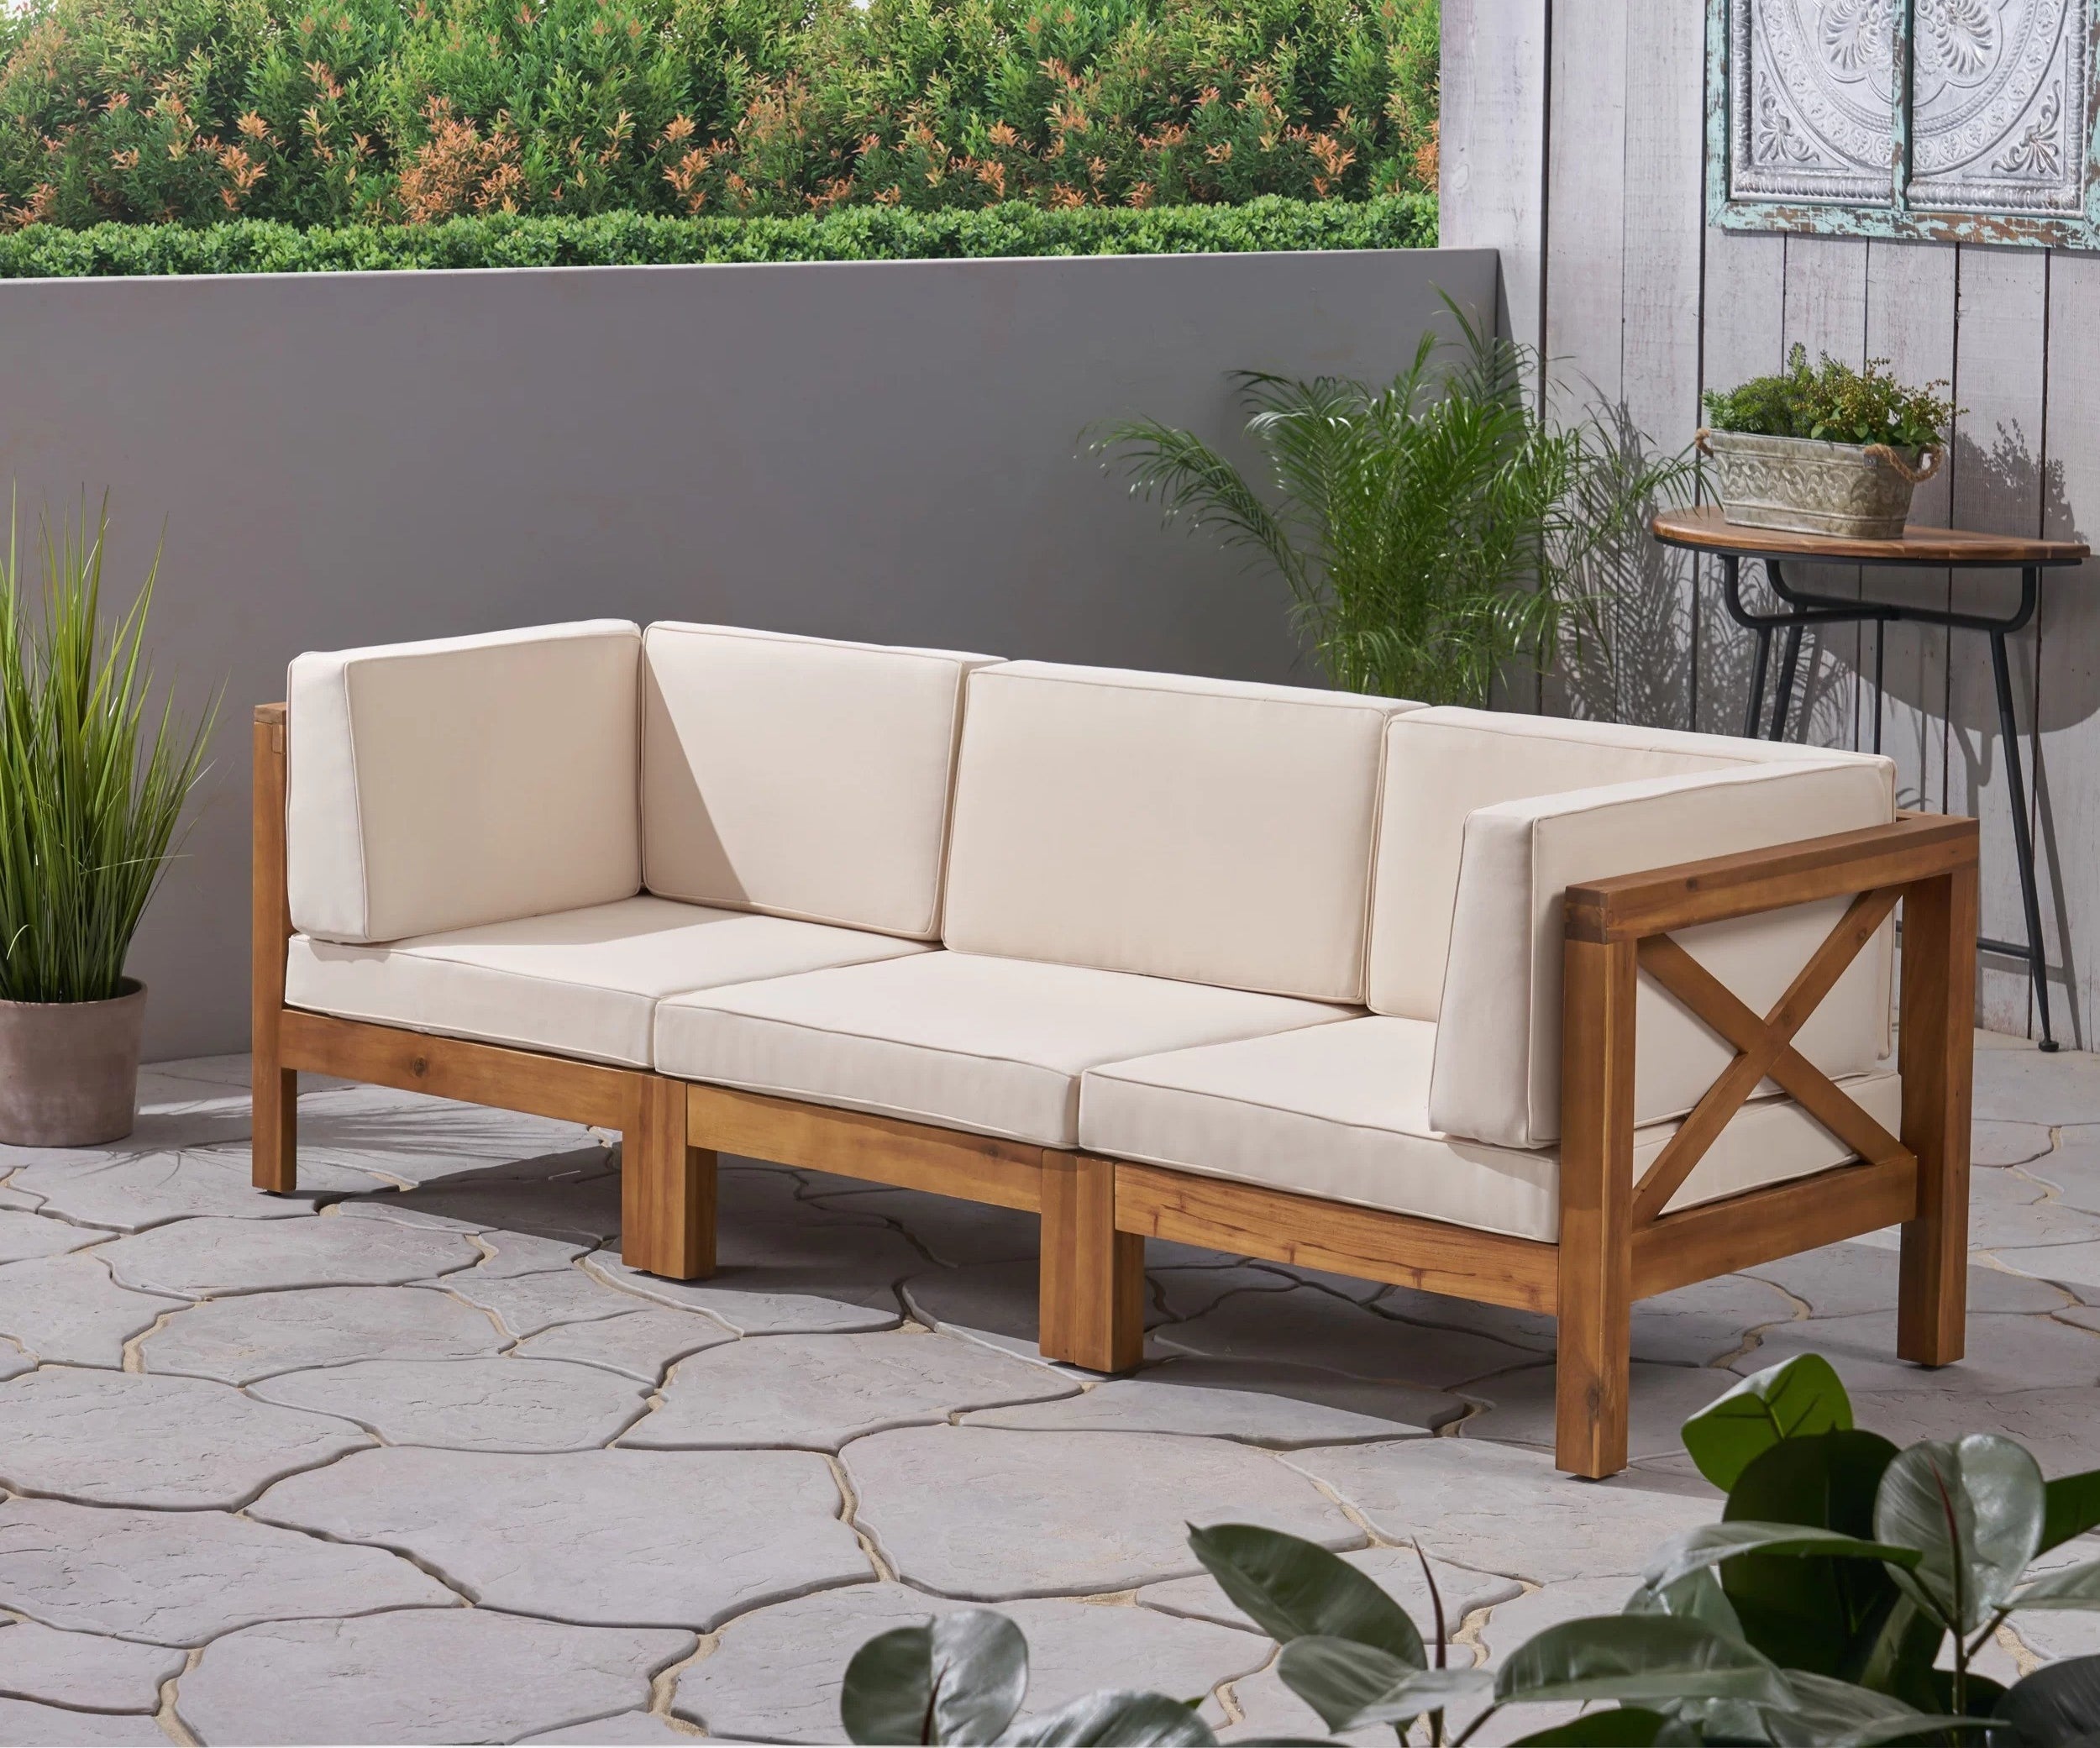 A wood sofa with beige cushions is shown on a patio